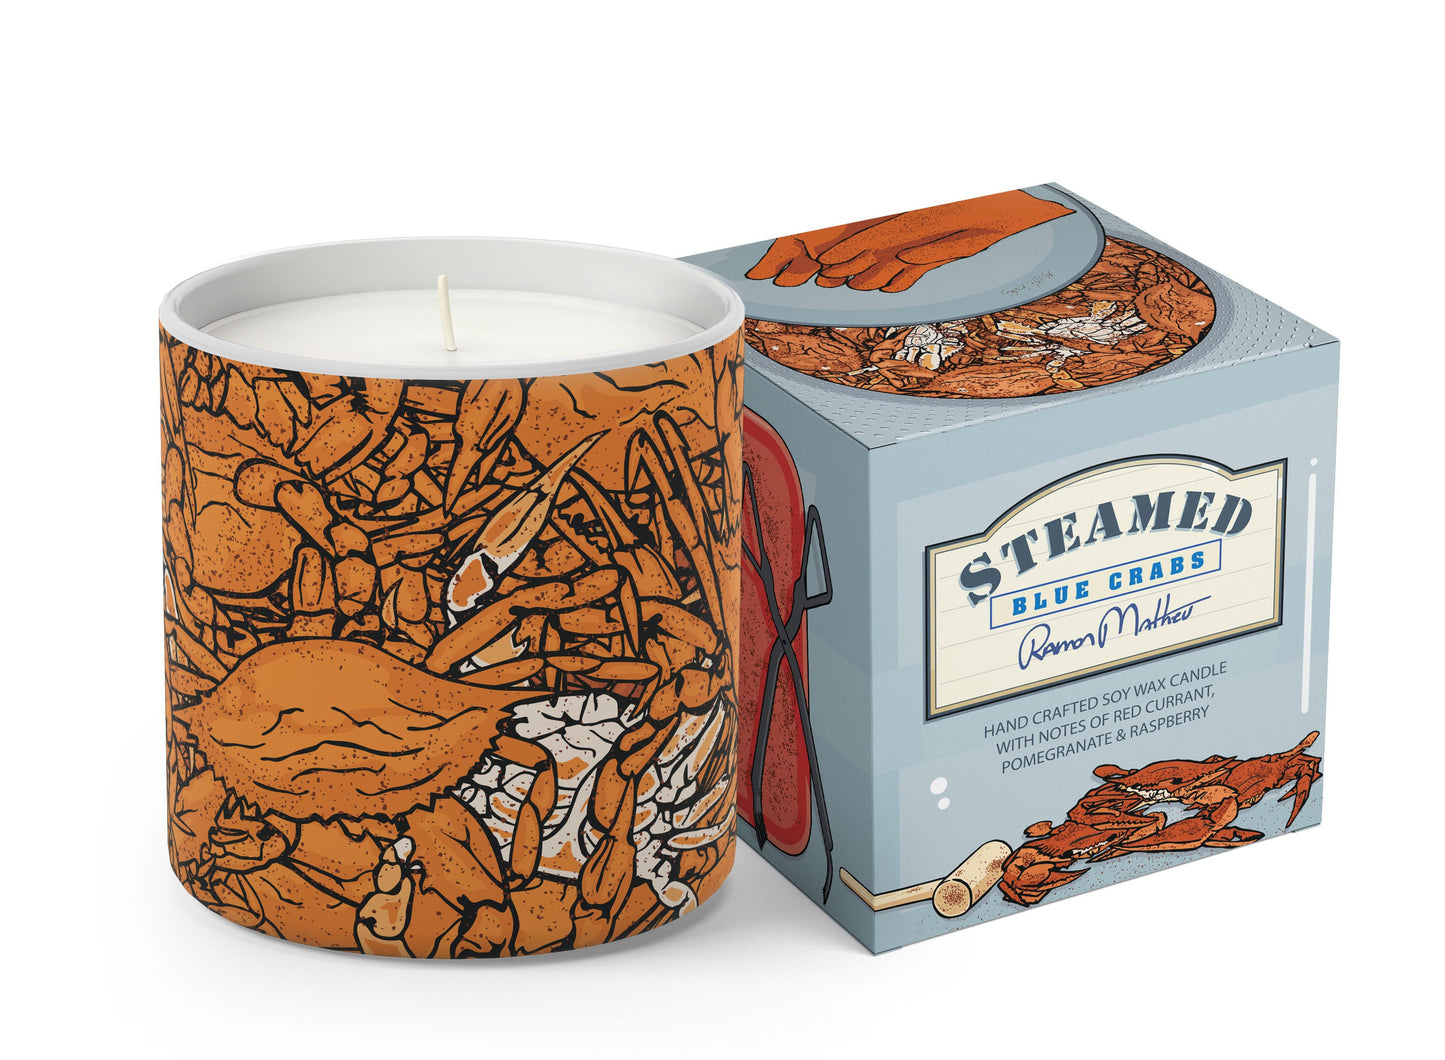 Steamed - Blue Crabs Design Boxed Candle